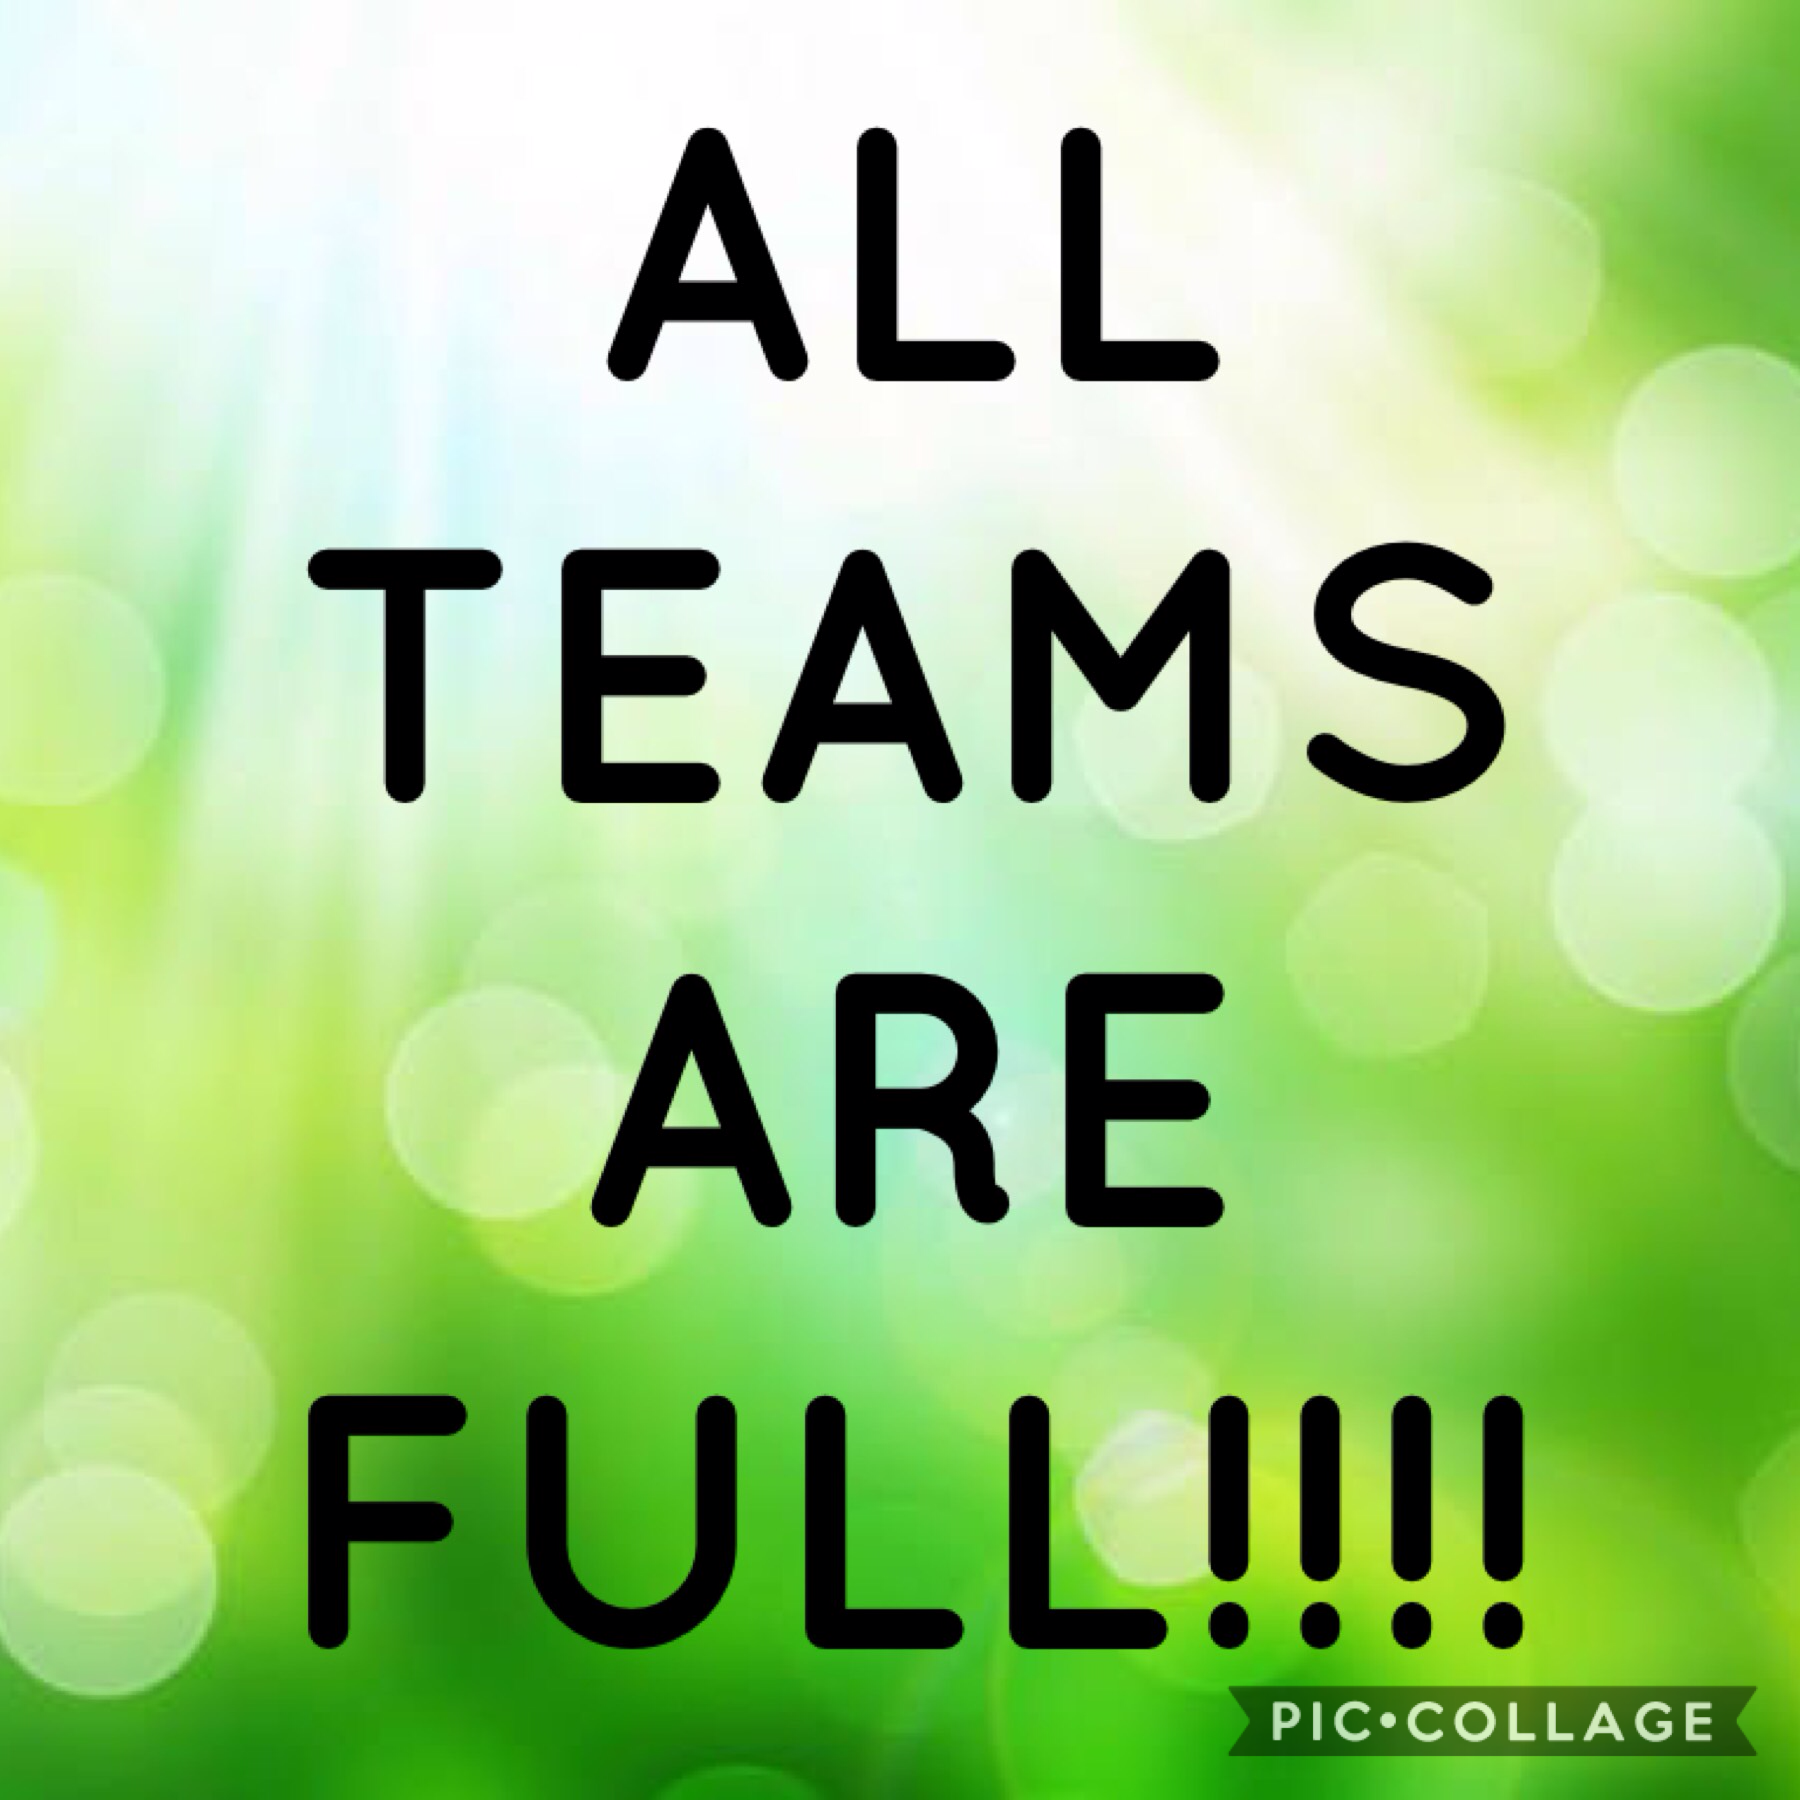 All teams are Full!